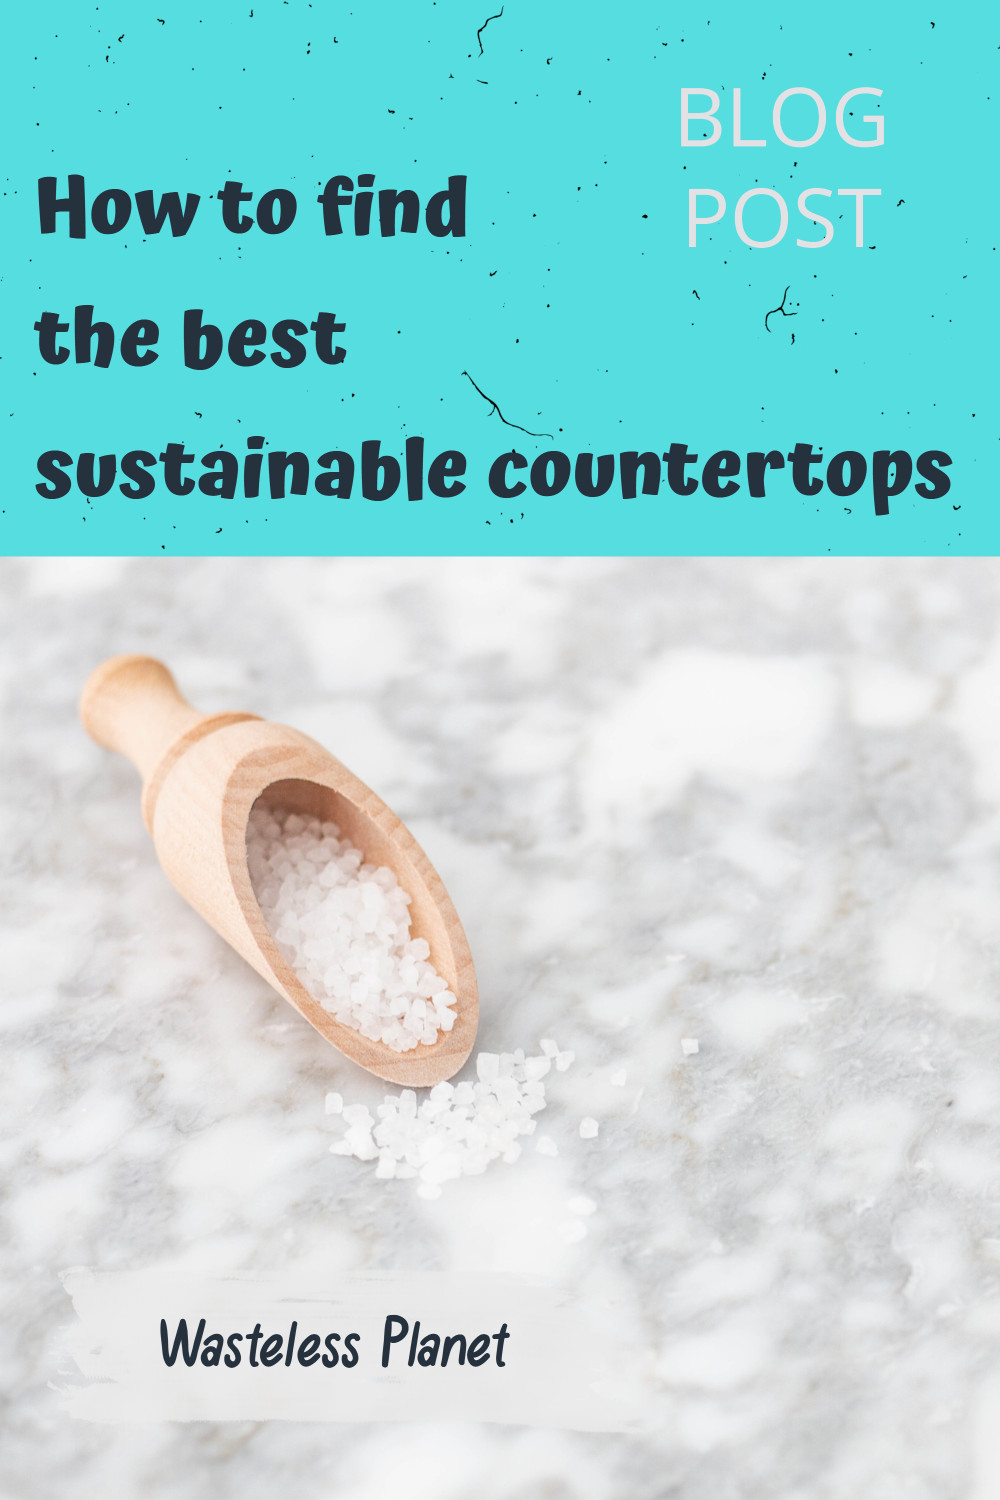 How to find the best sustainable countertops